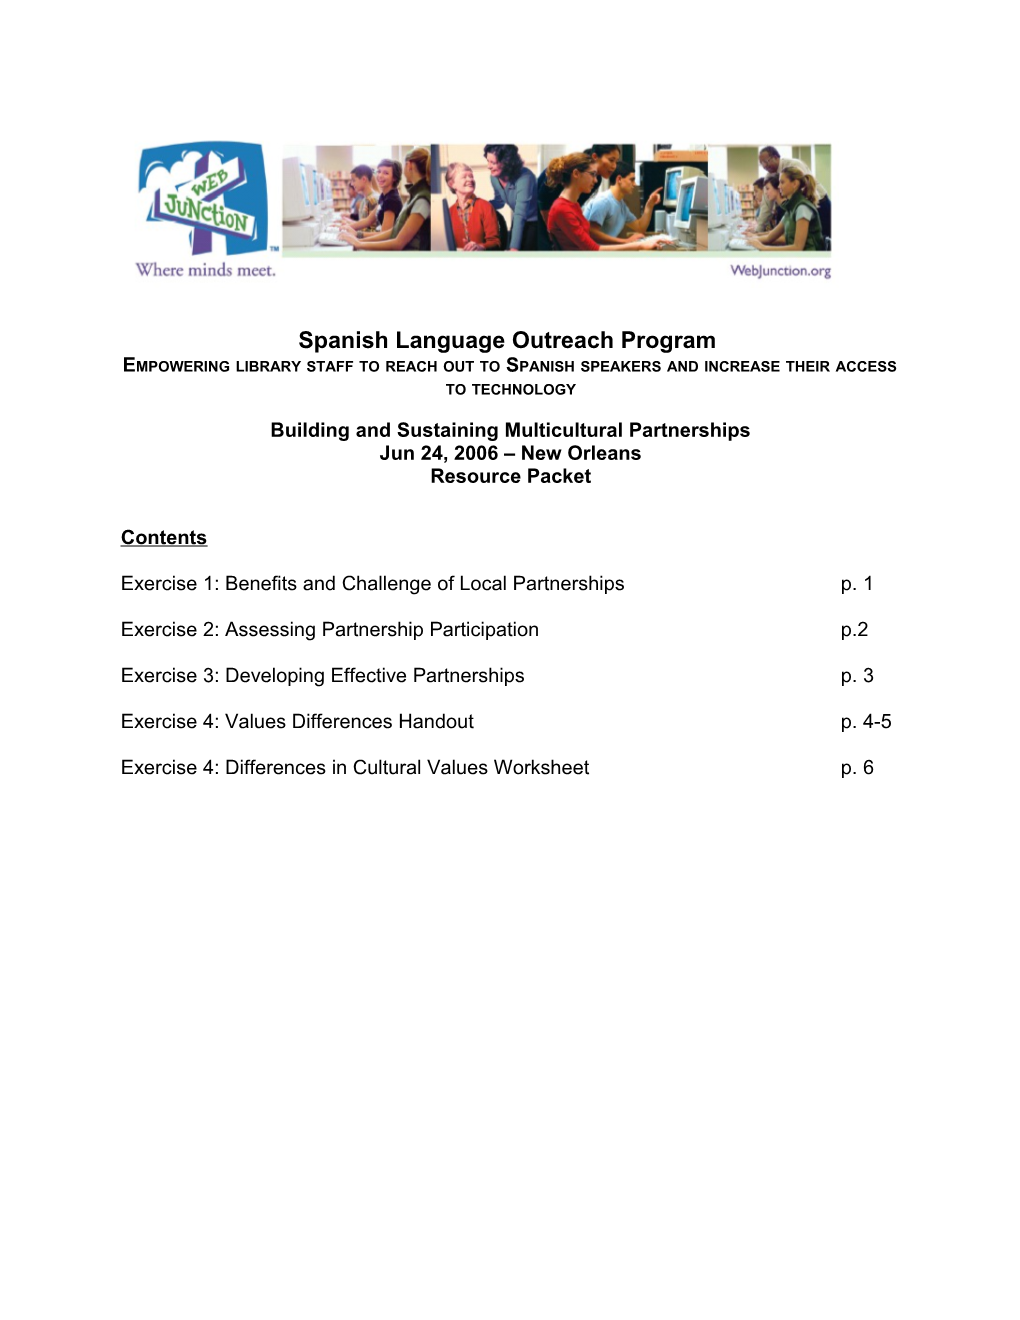 Exercise 4: Differences in Cultural Values Worksheet